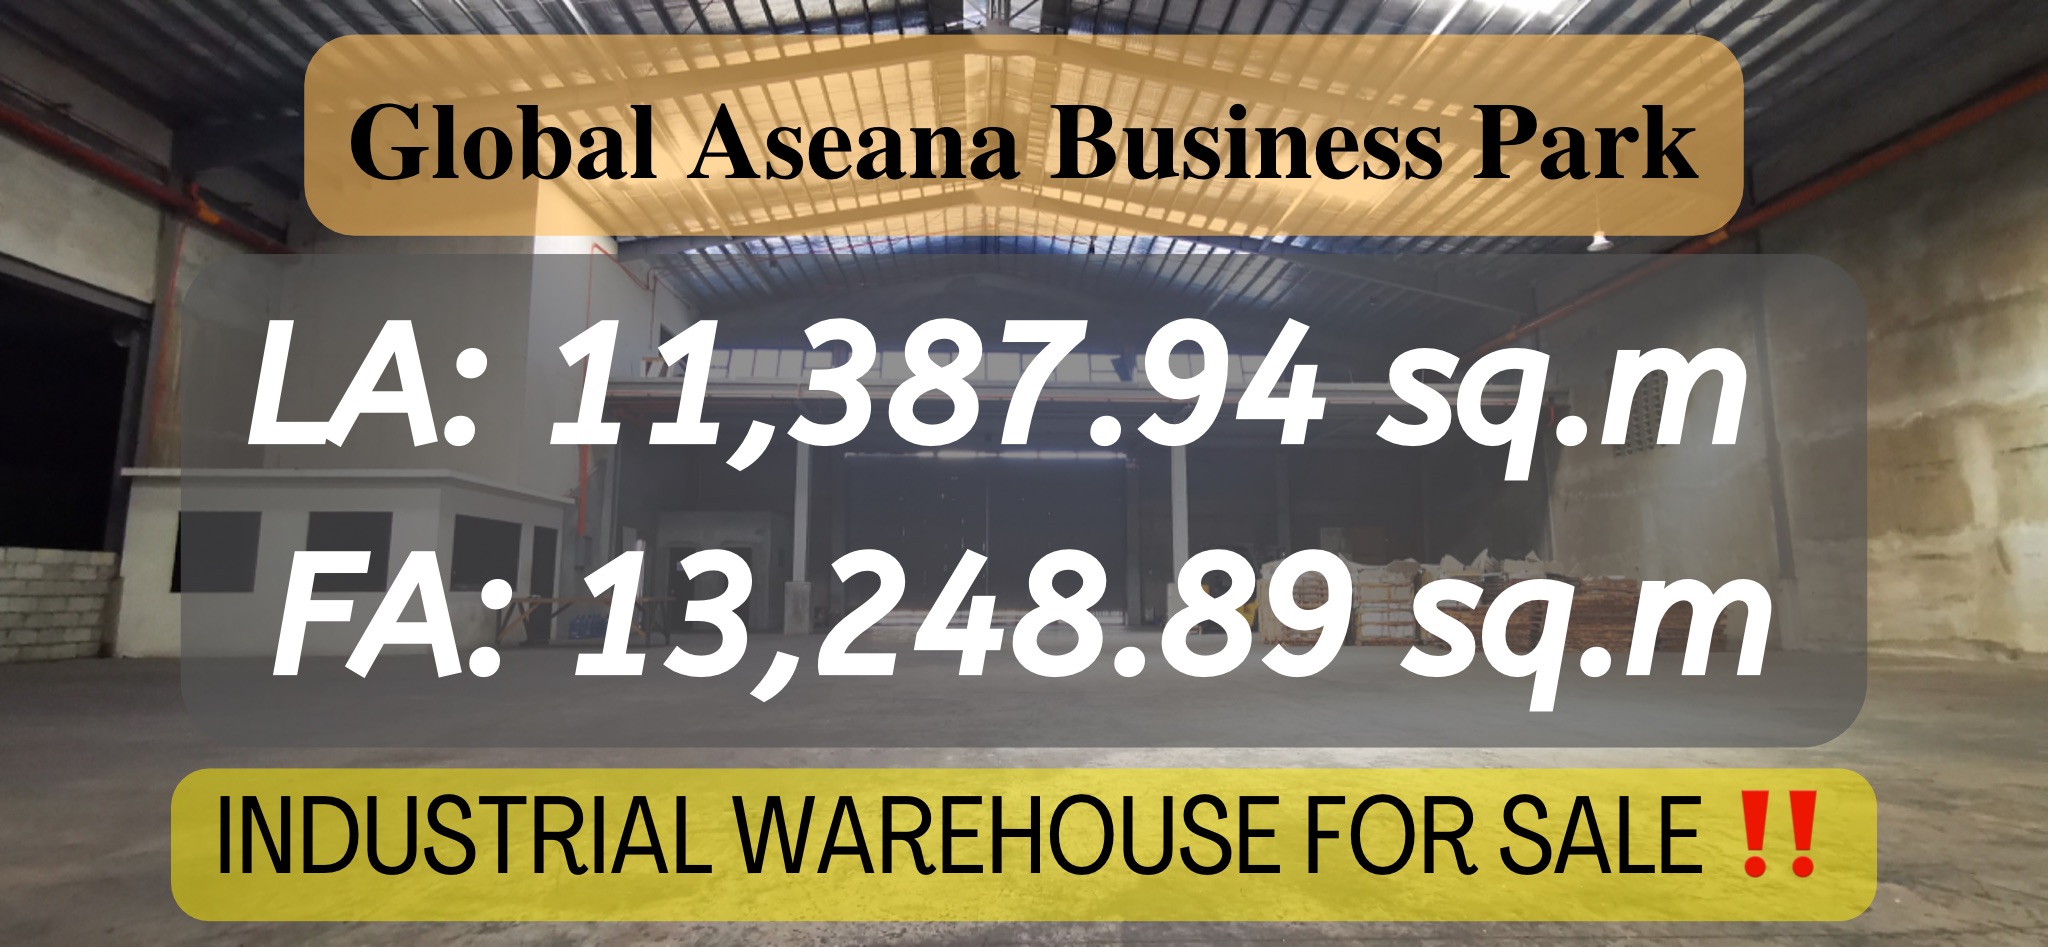 Global Aseana Business Park  INDUSTRIAL WAREHOUSE FOR SALE ‼️